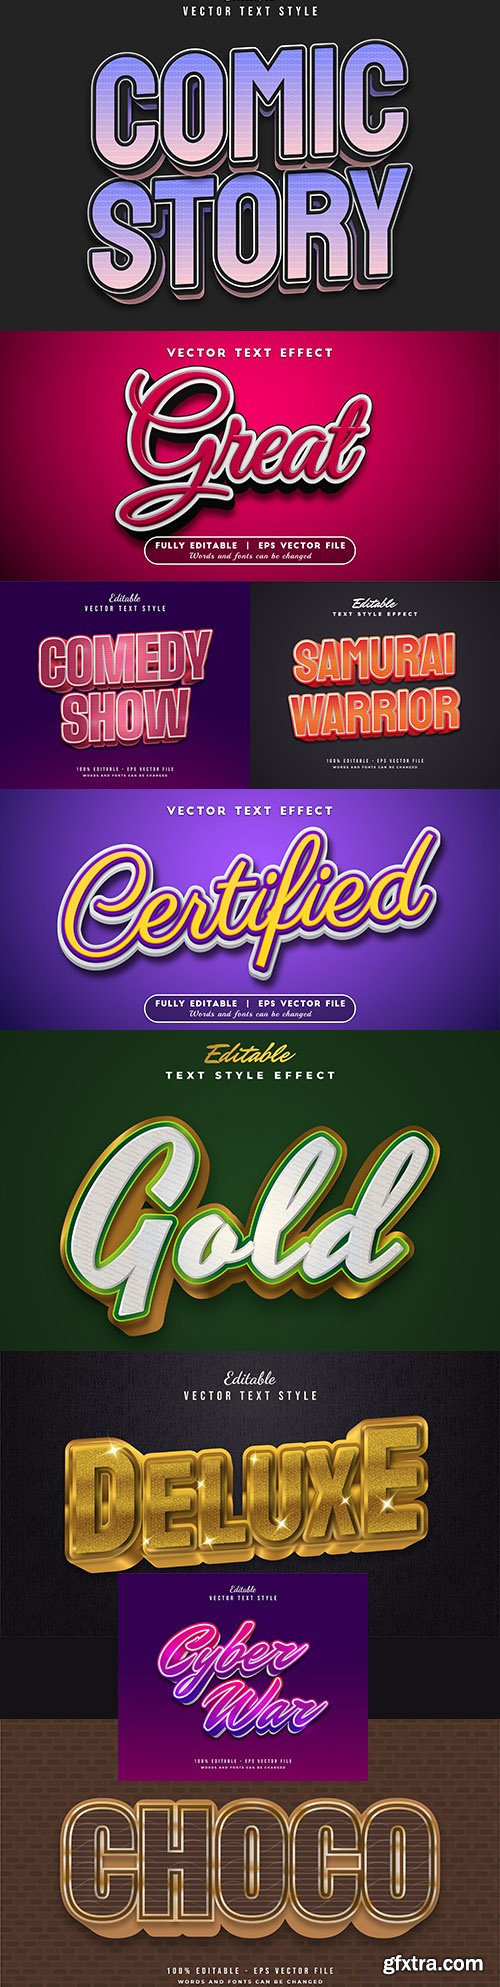 Editable font and 3d effect text design collection illustration 56